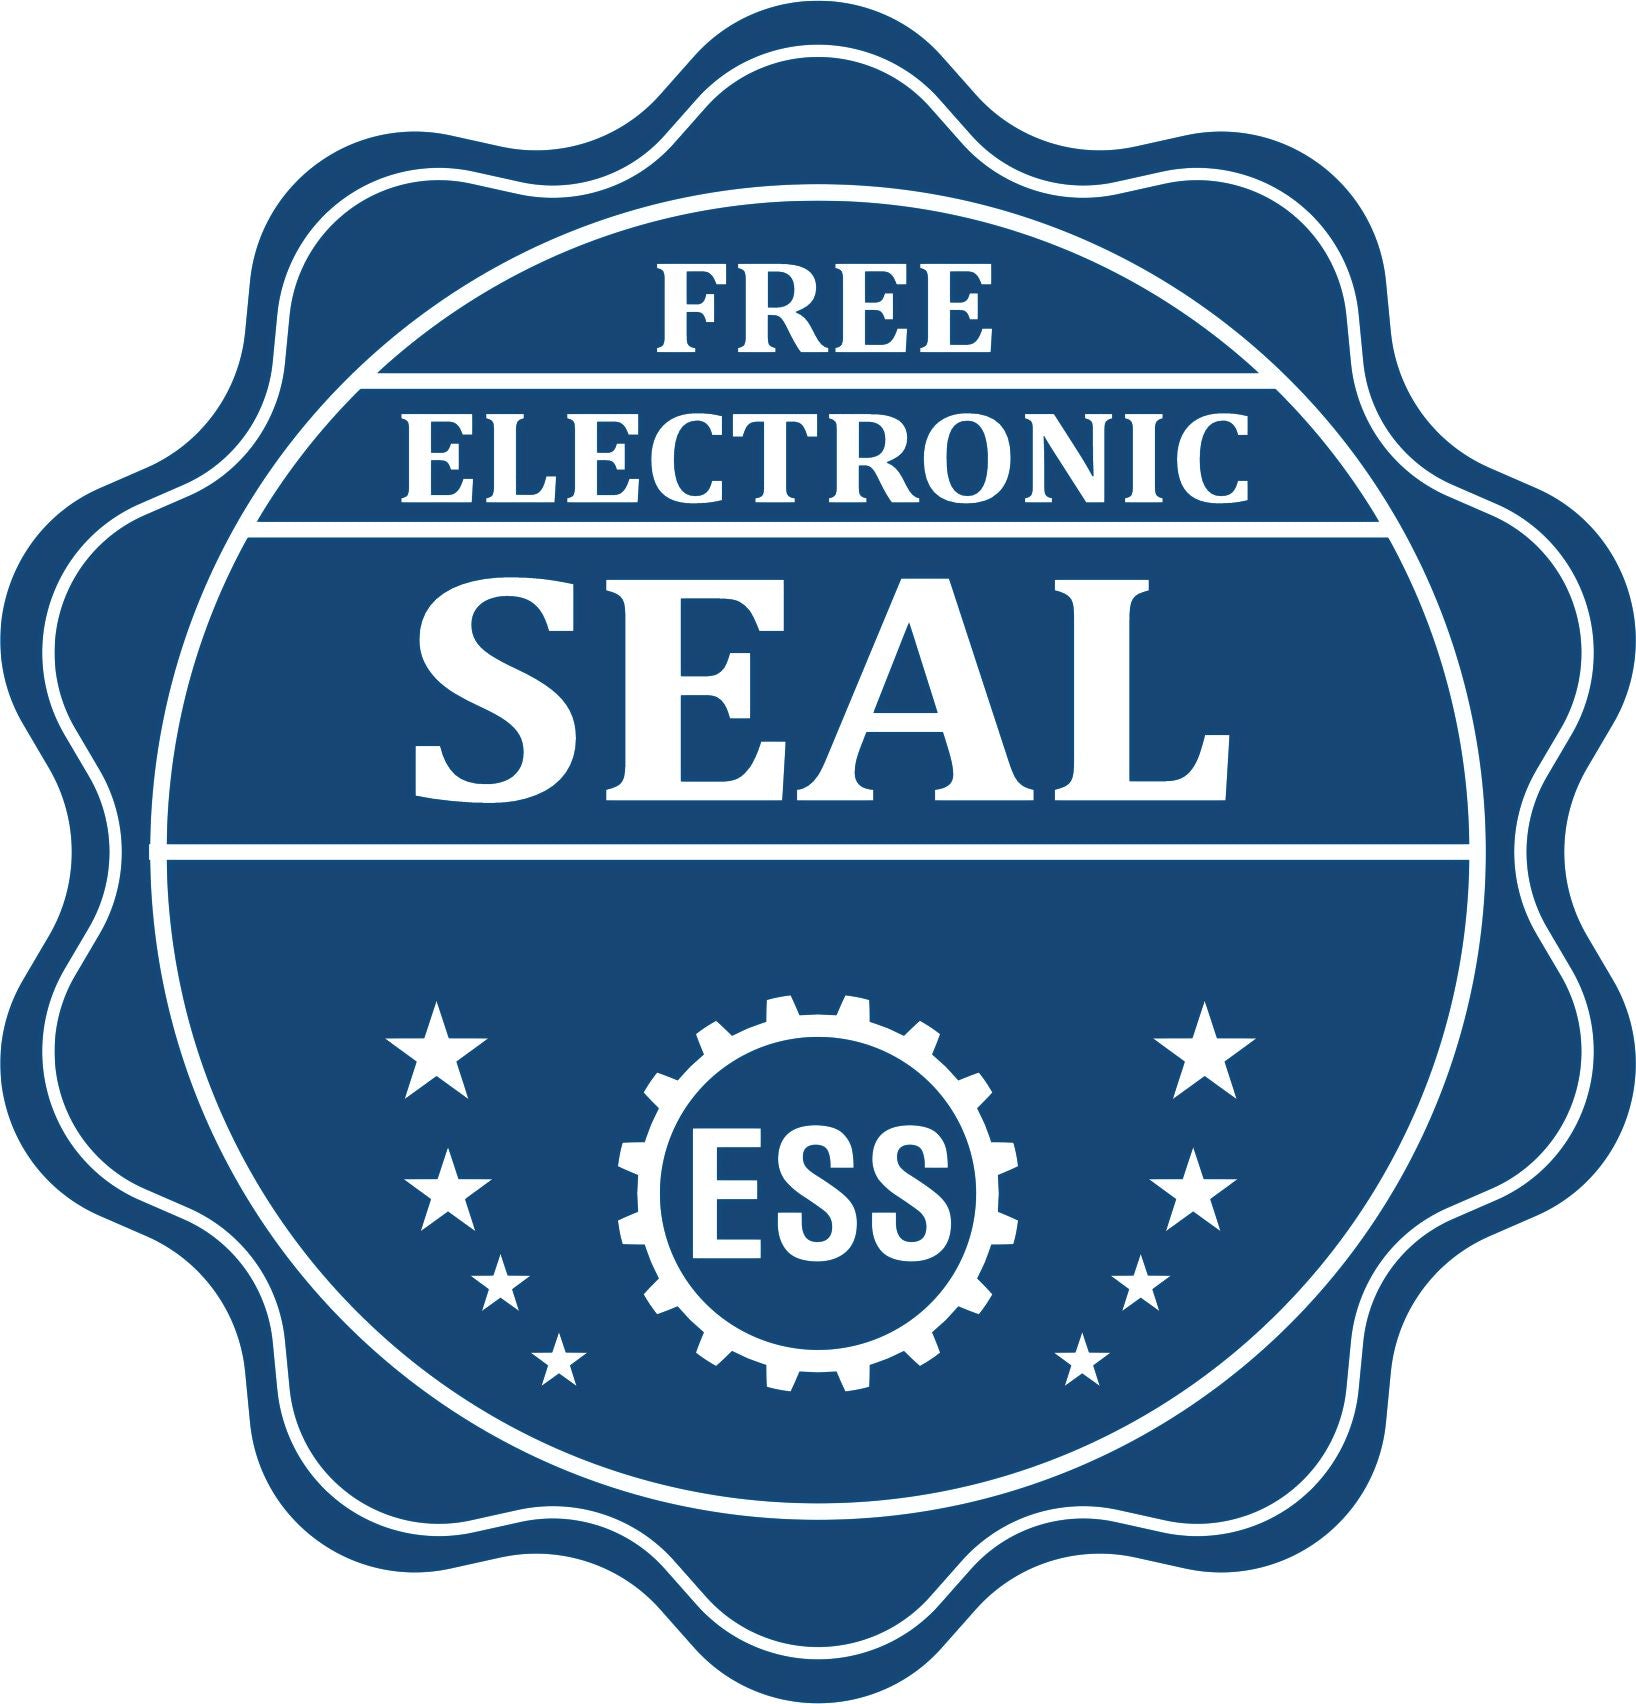 A badge showing a free electronic seal for the Pennsylvania Geologist Desk Seal with stars and the ESS gear on the emblem.